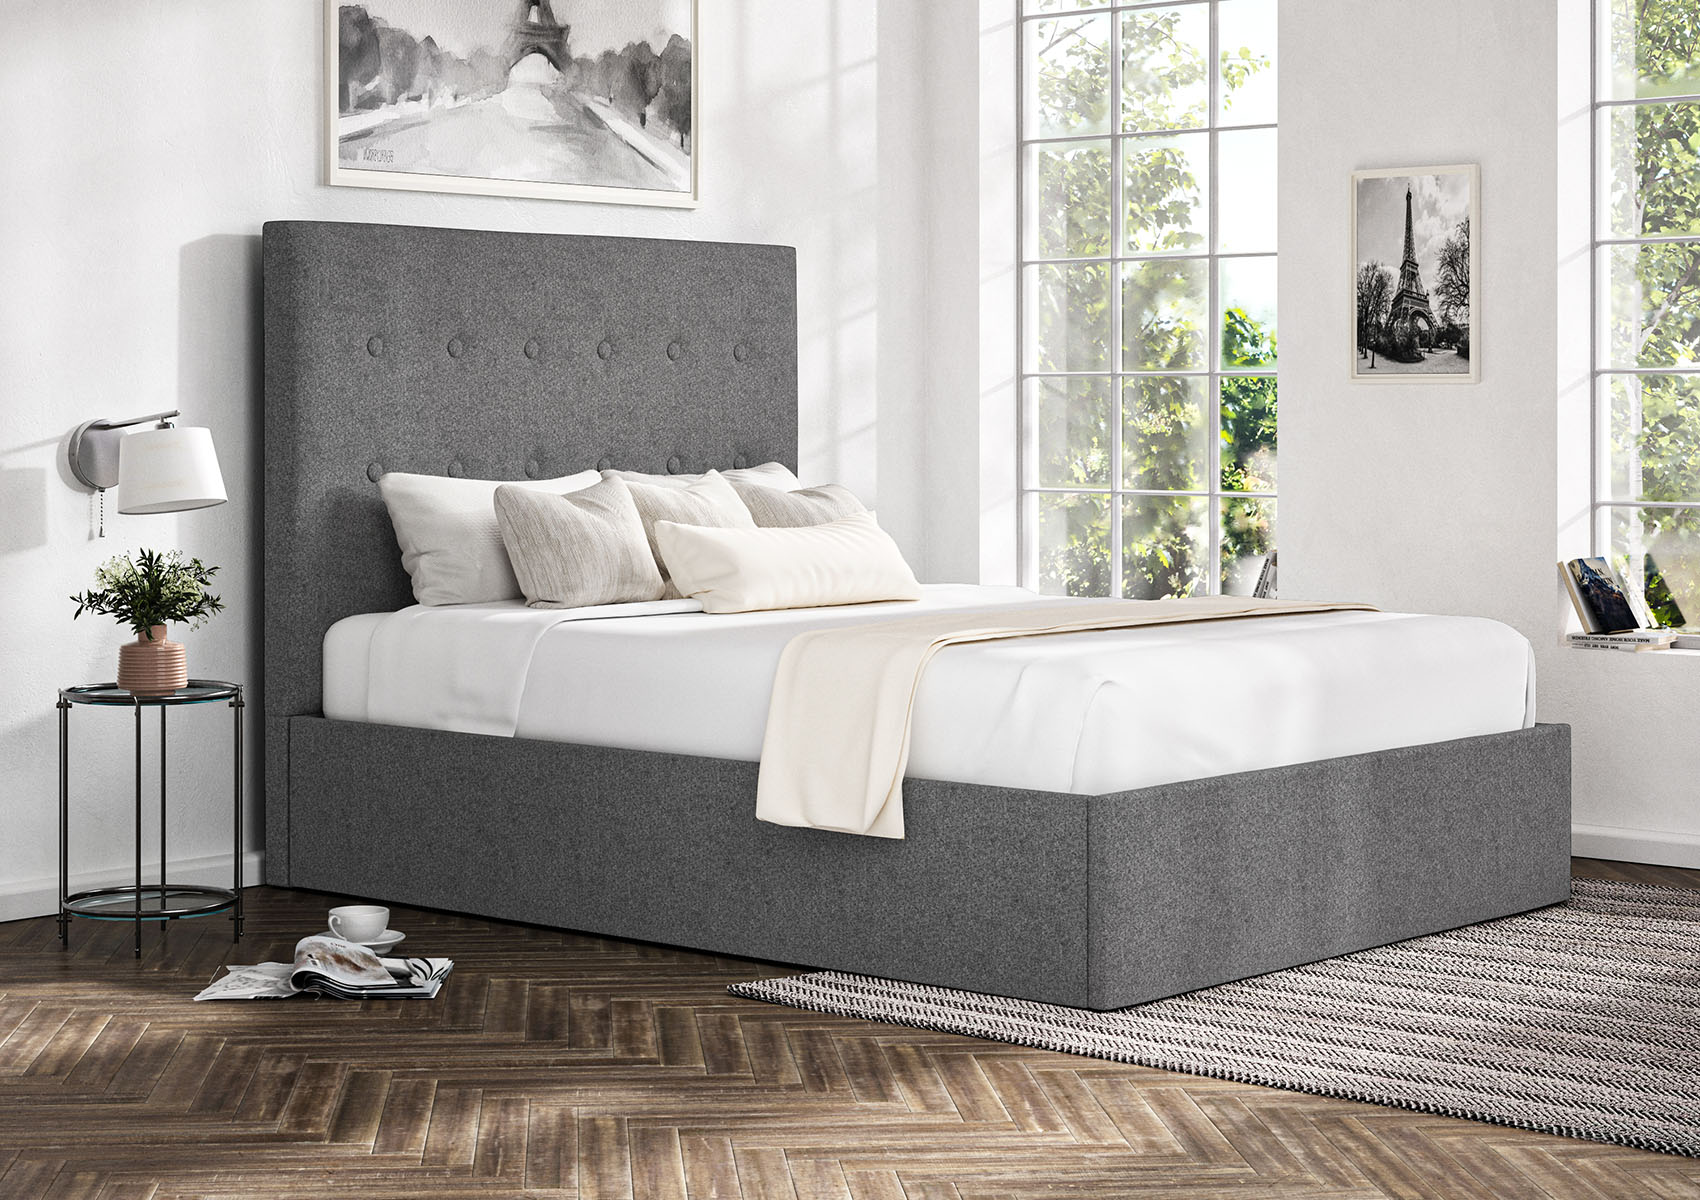 View Piper Arran Pebble Upholstered Ottoman Bed Frame Only Time4Sleep information